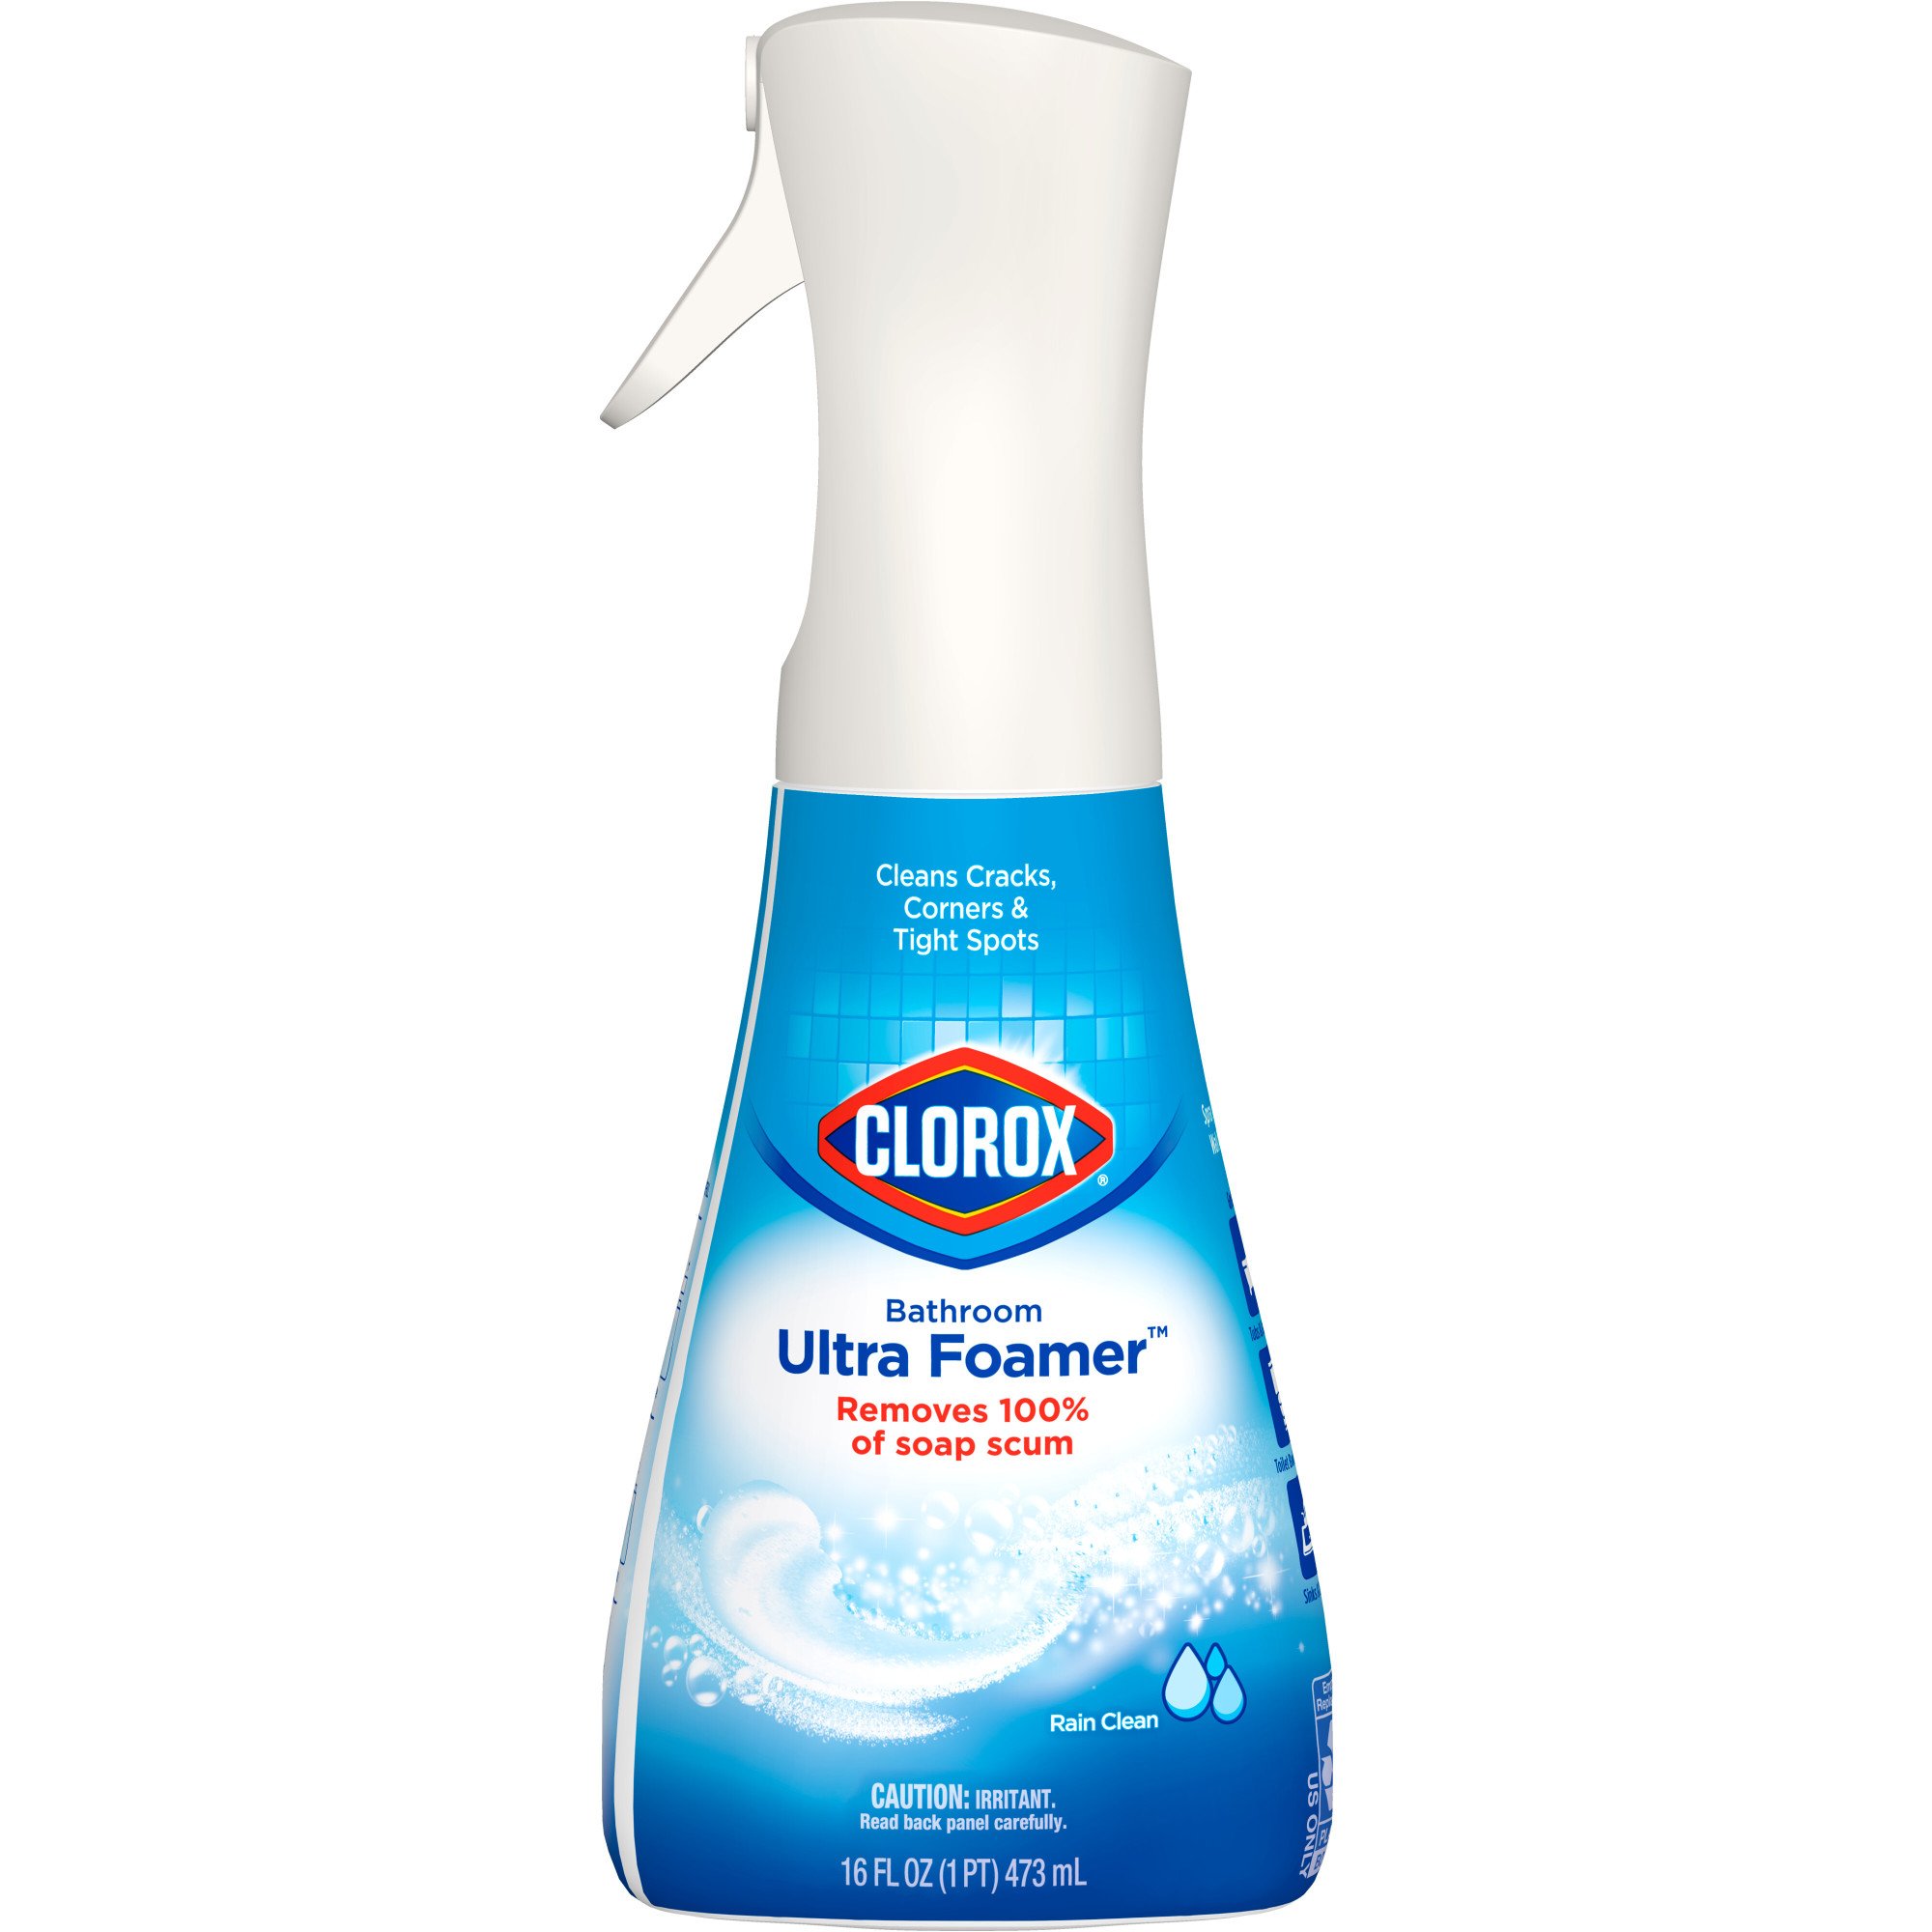 Scrubbing Bubbles Rainshower Scent Bathroom Cleaner - Shop All Purpose  Cleaners at H-E-B